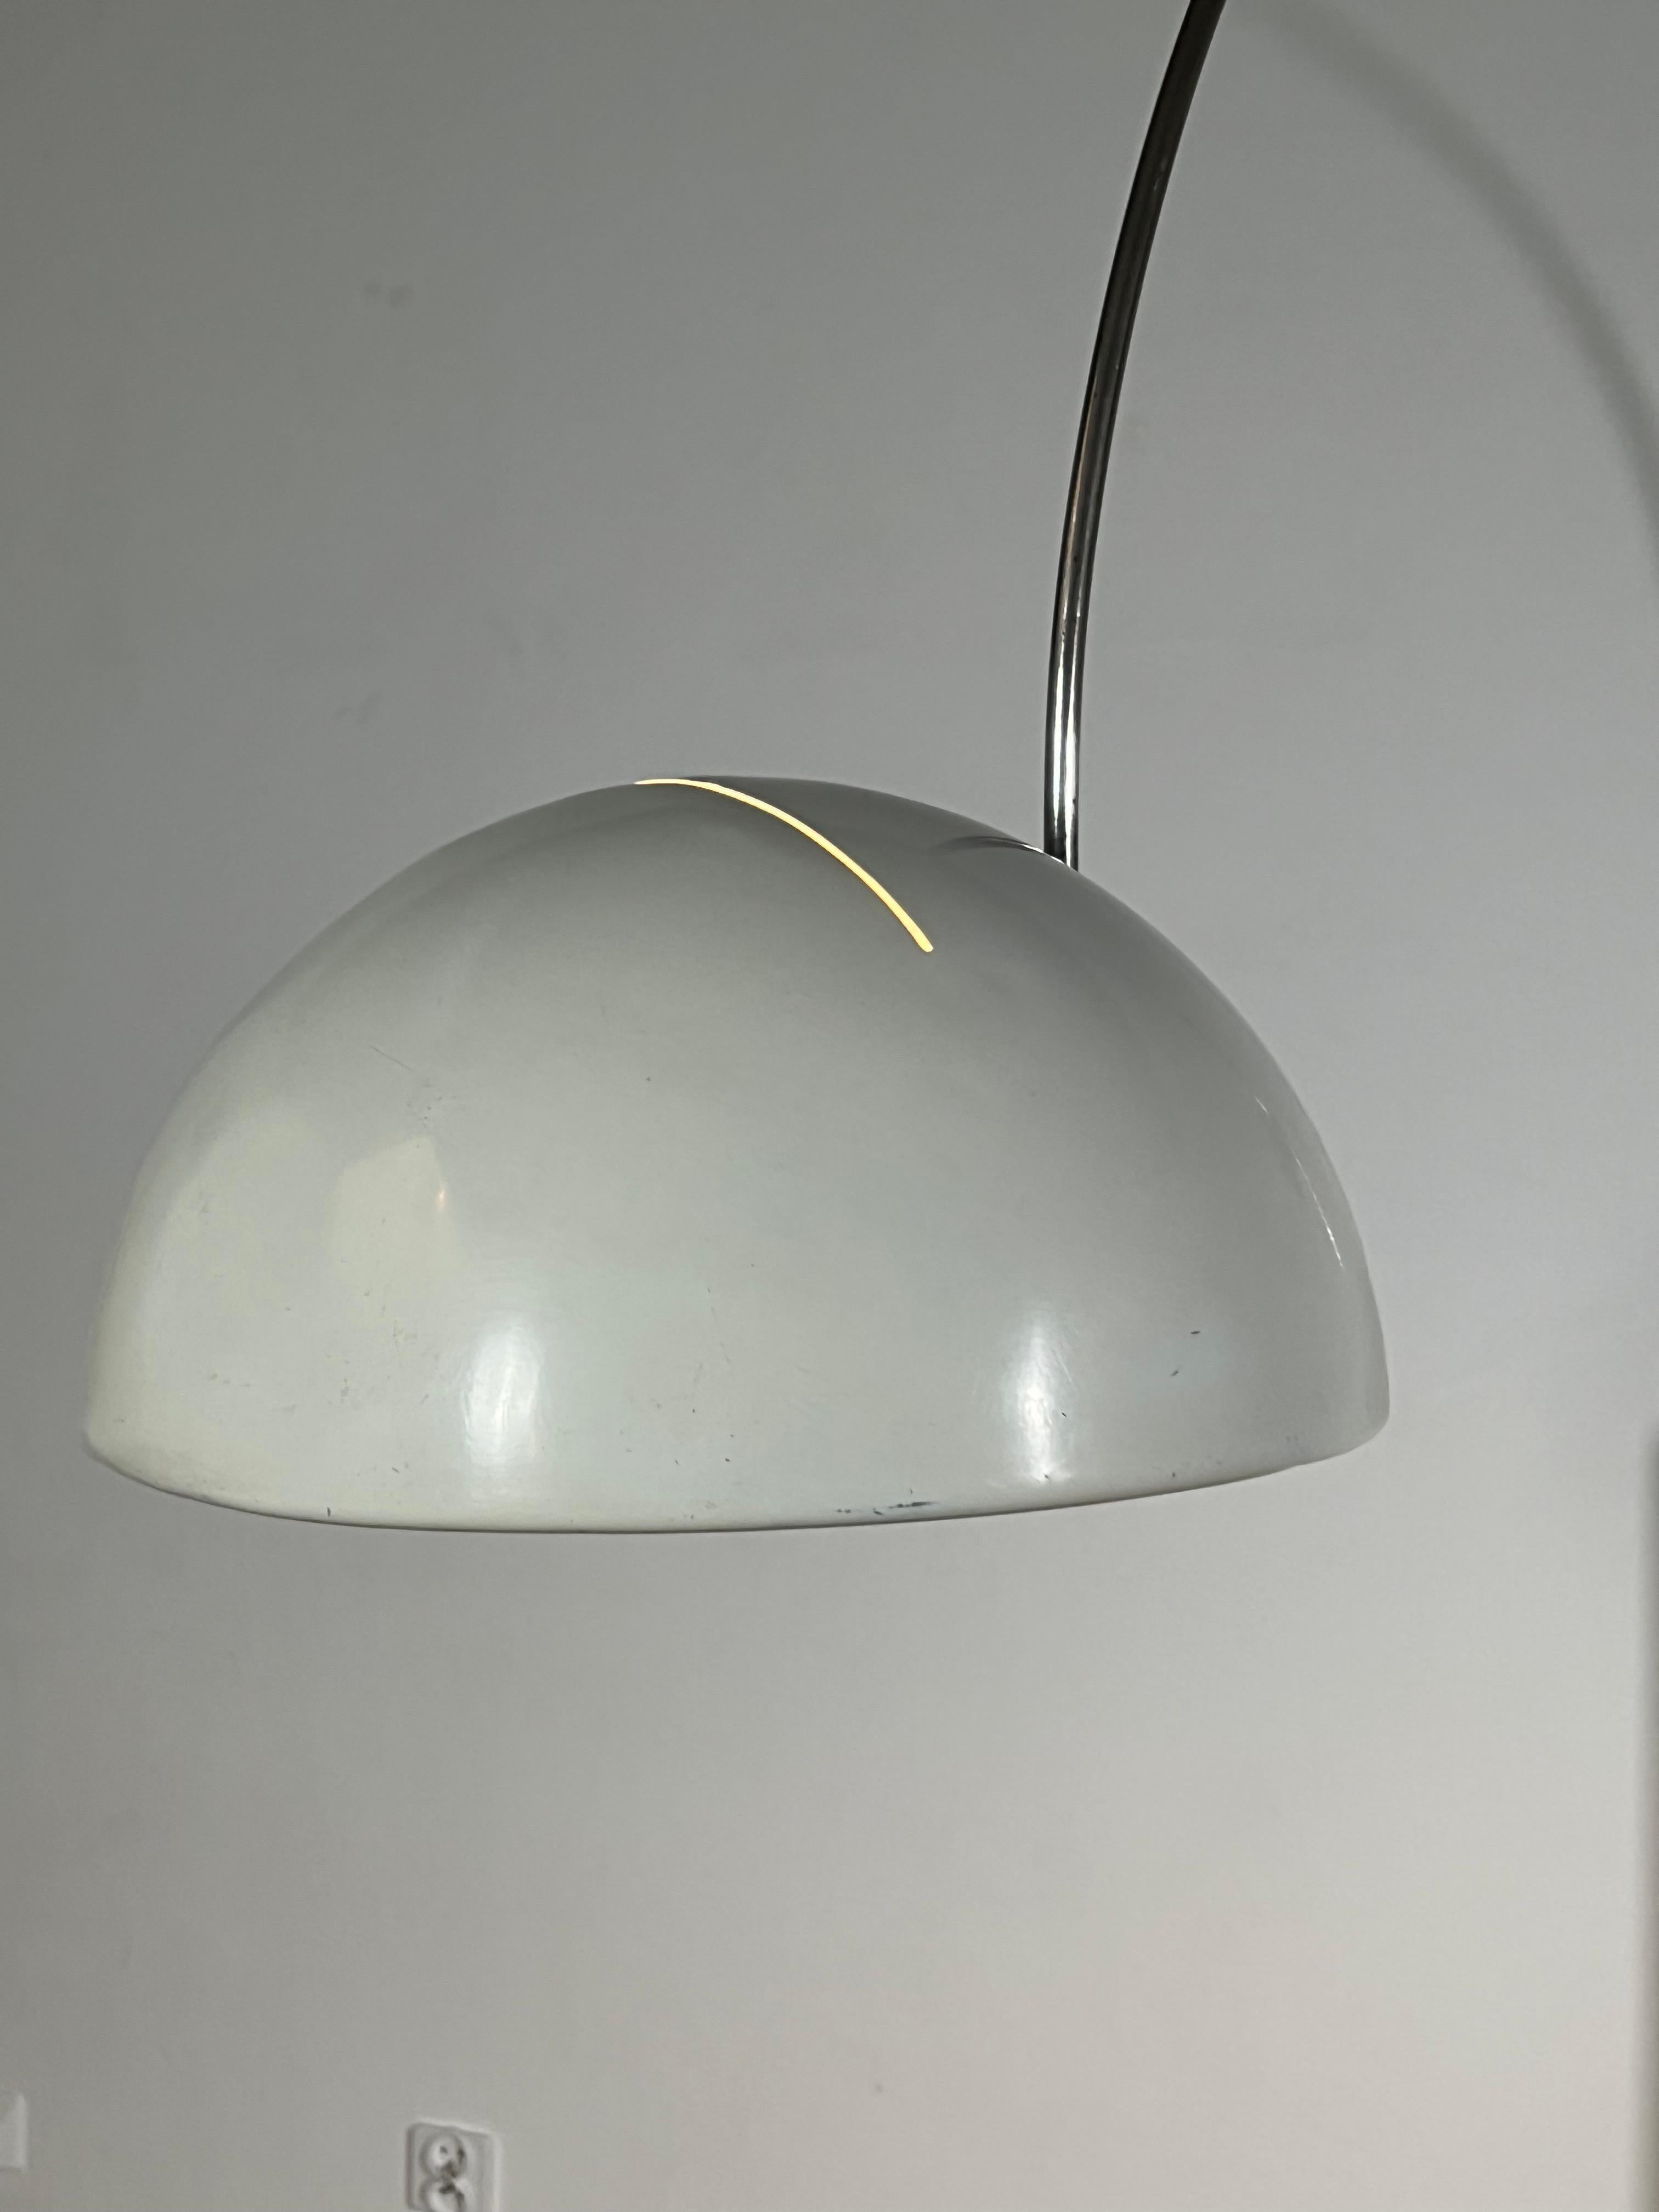 Mid-20th Century Coupe Floor Lamp by Joe Colombo for Oluce, 1960s For Sale